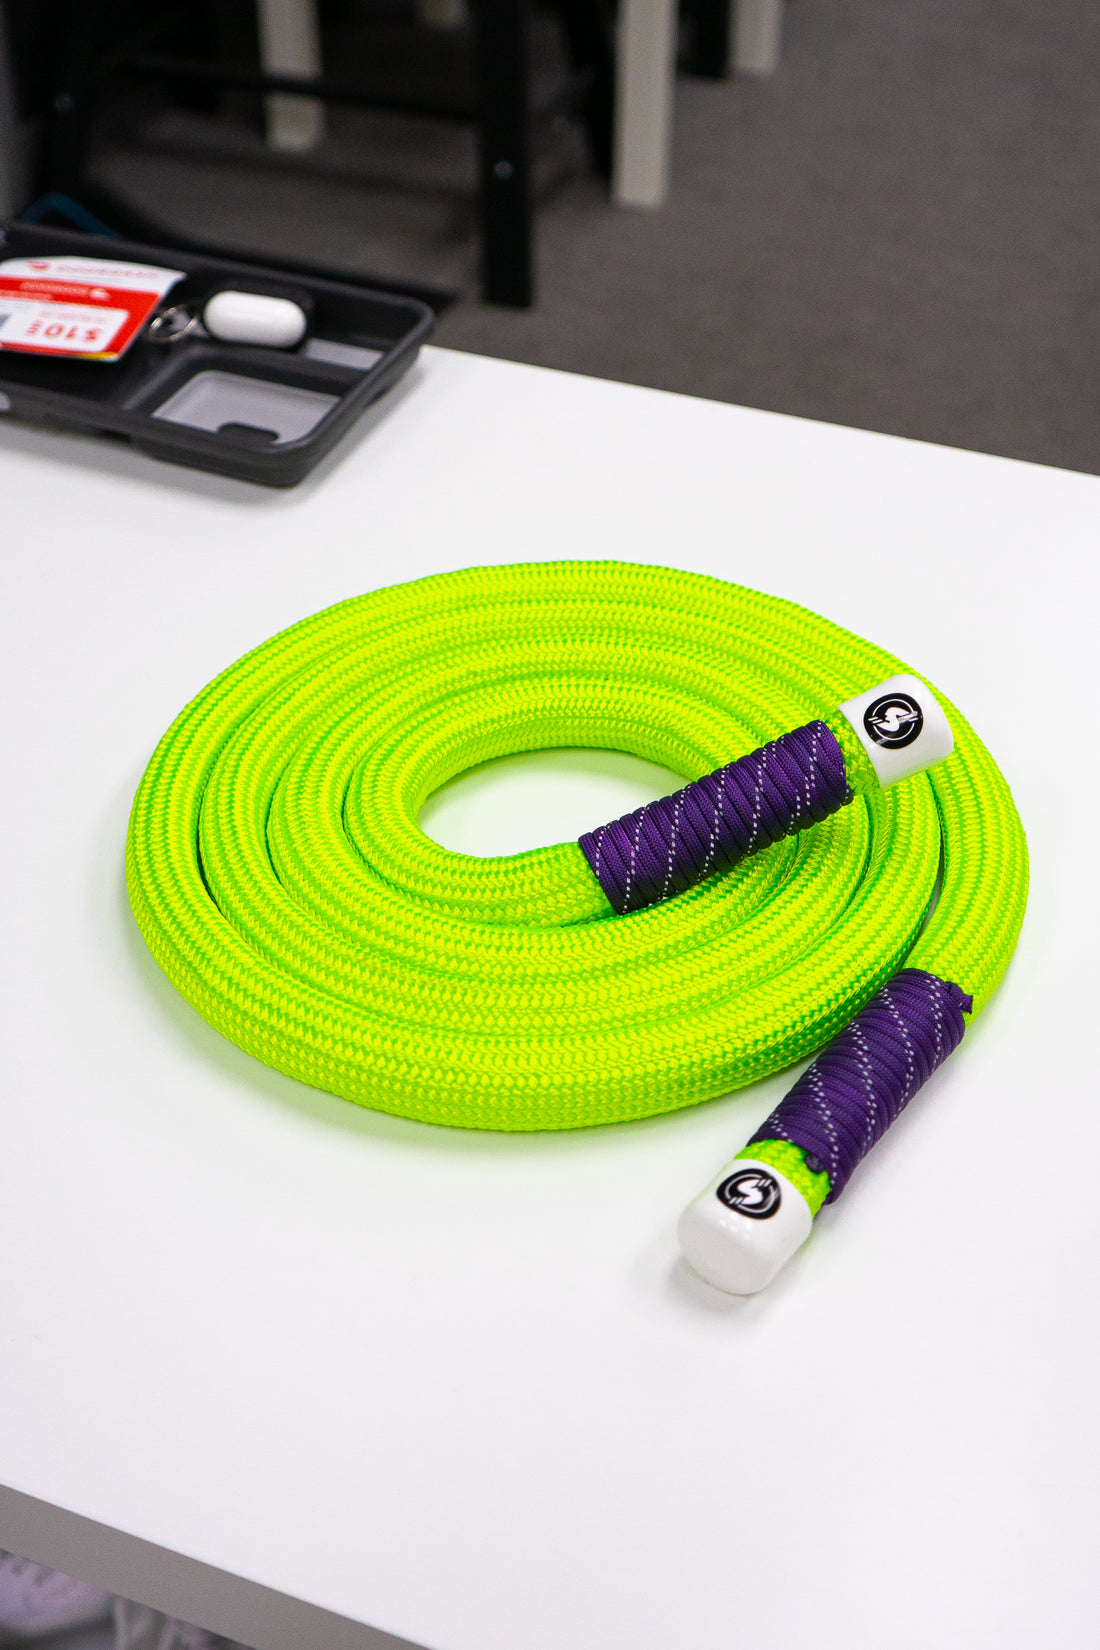 Are Your Flow Ropes Safe? (The Inherent Risks of Flow Rope Designs) by SLUSHROPES